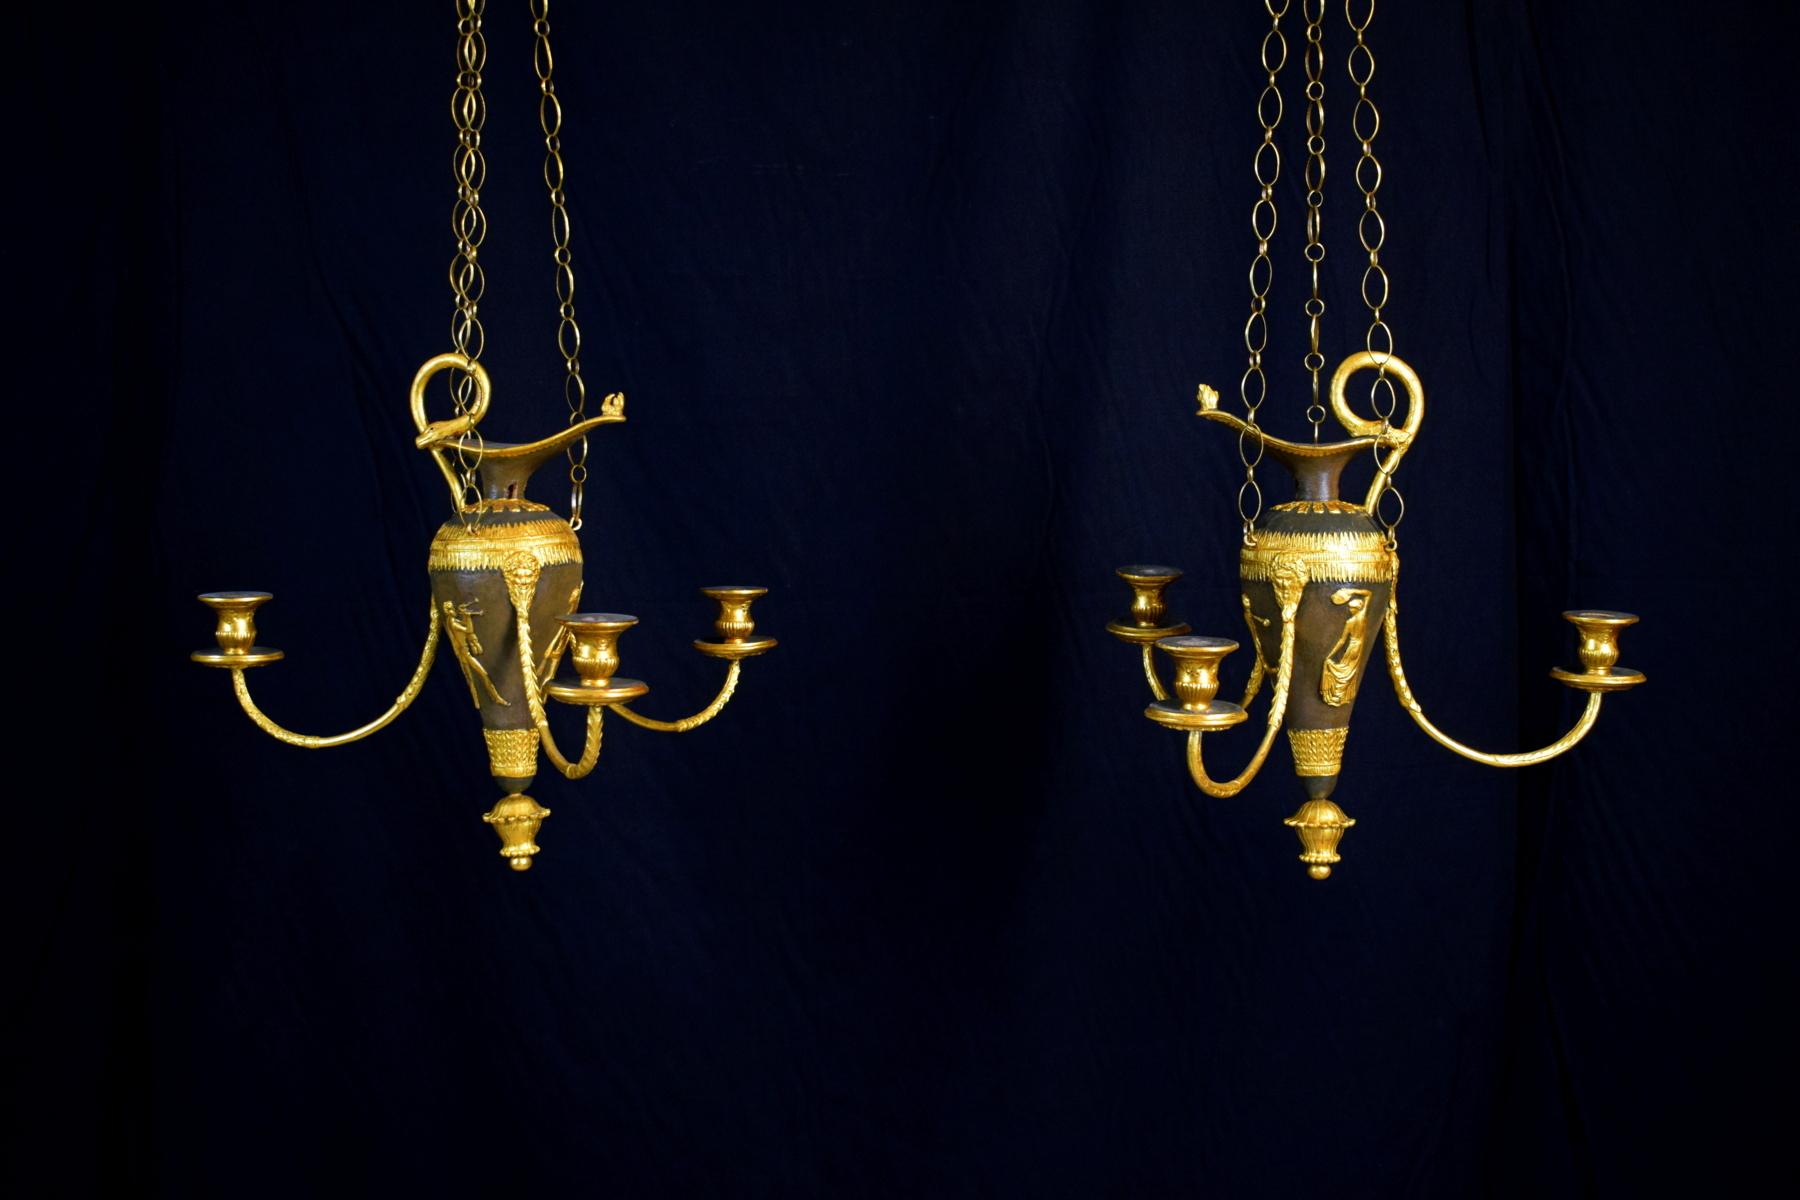 Last quarter of 18th century, pair of Italian lacquered wood and gilded Pastiglia chandeliers

The chandeliers are made of carved and lacquered wood in bronze imitation with gilded pastiglia decorations. They are composed of a body shaped like an